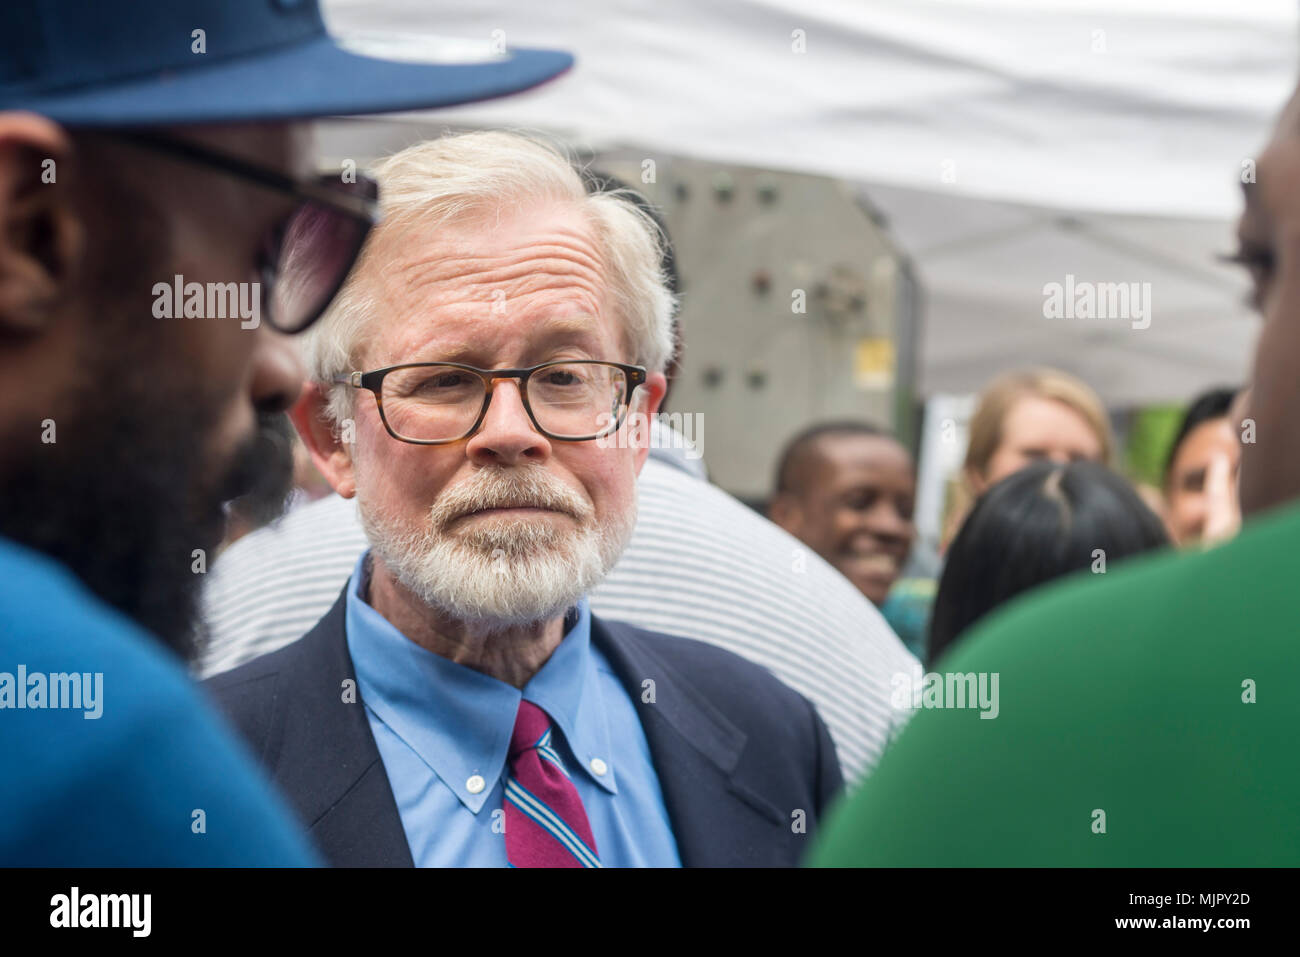 New York, NY, USA - 5 May 2018 - Marijuana advocates rallied in Union Square calling on New York State lawmakers to legalize marijuana for recreational use. State Senator Richard Gottfried, who sponsored the bill to legalize Medical Marijuana attended and spoke the rally. CREDIT ©Stacy Walsh Rosenstock/Alamy Live News Stock Photo